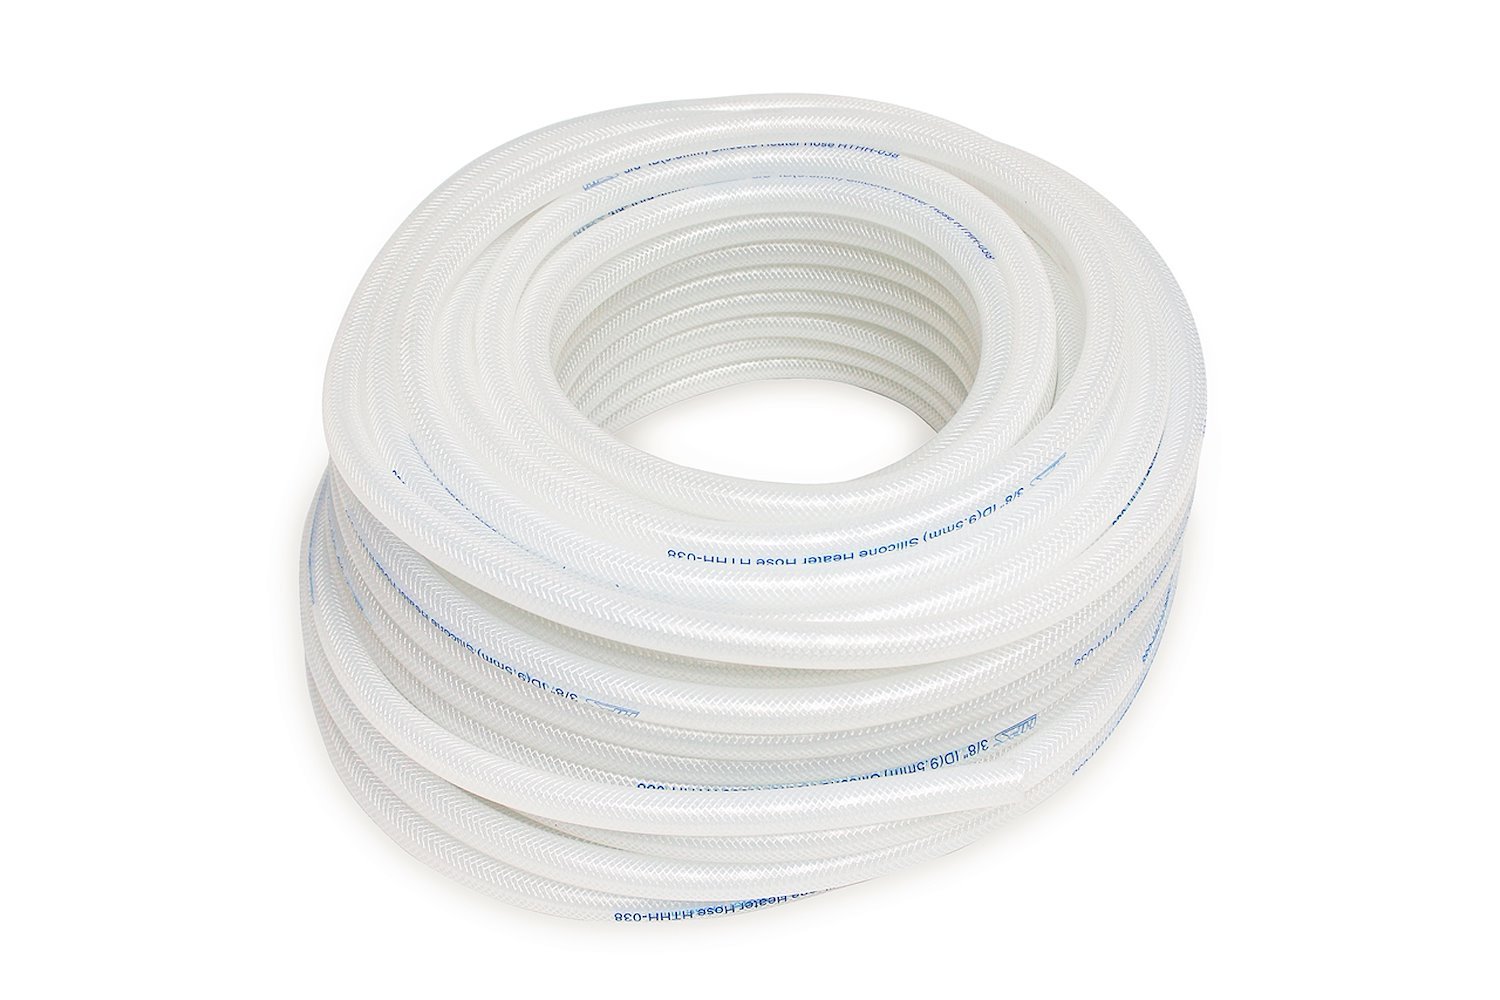 HTHH-062-CLEARx100 Silicone Heater Hose Tubing, High-Temp Reinforced, 5/8 in. ID, 100 ft. Roll, Clear